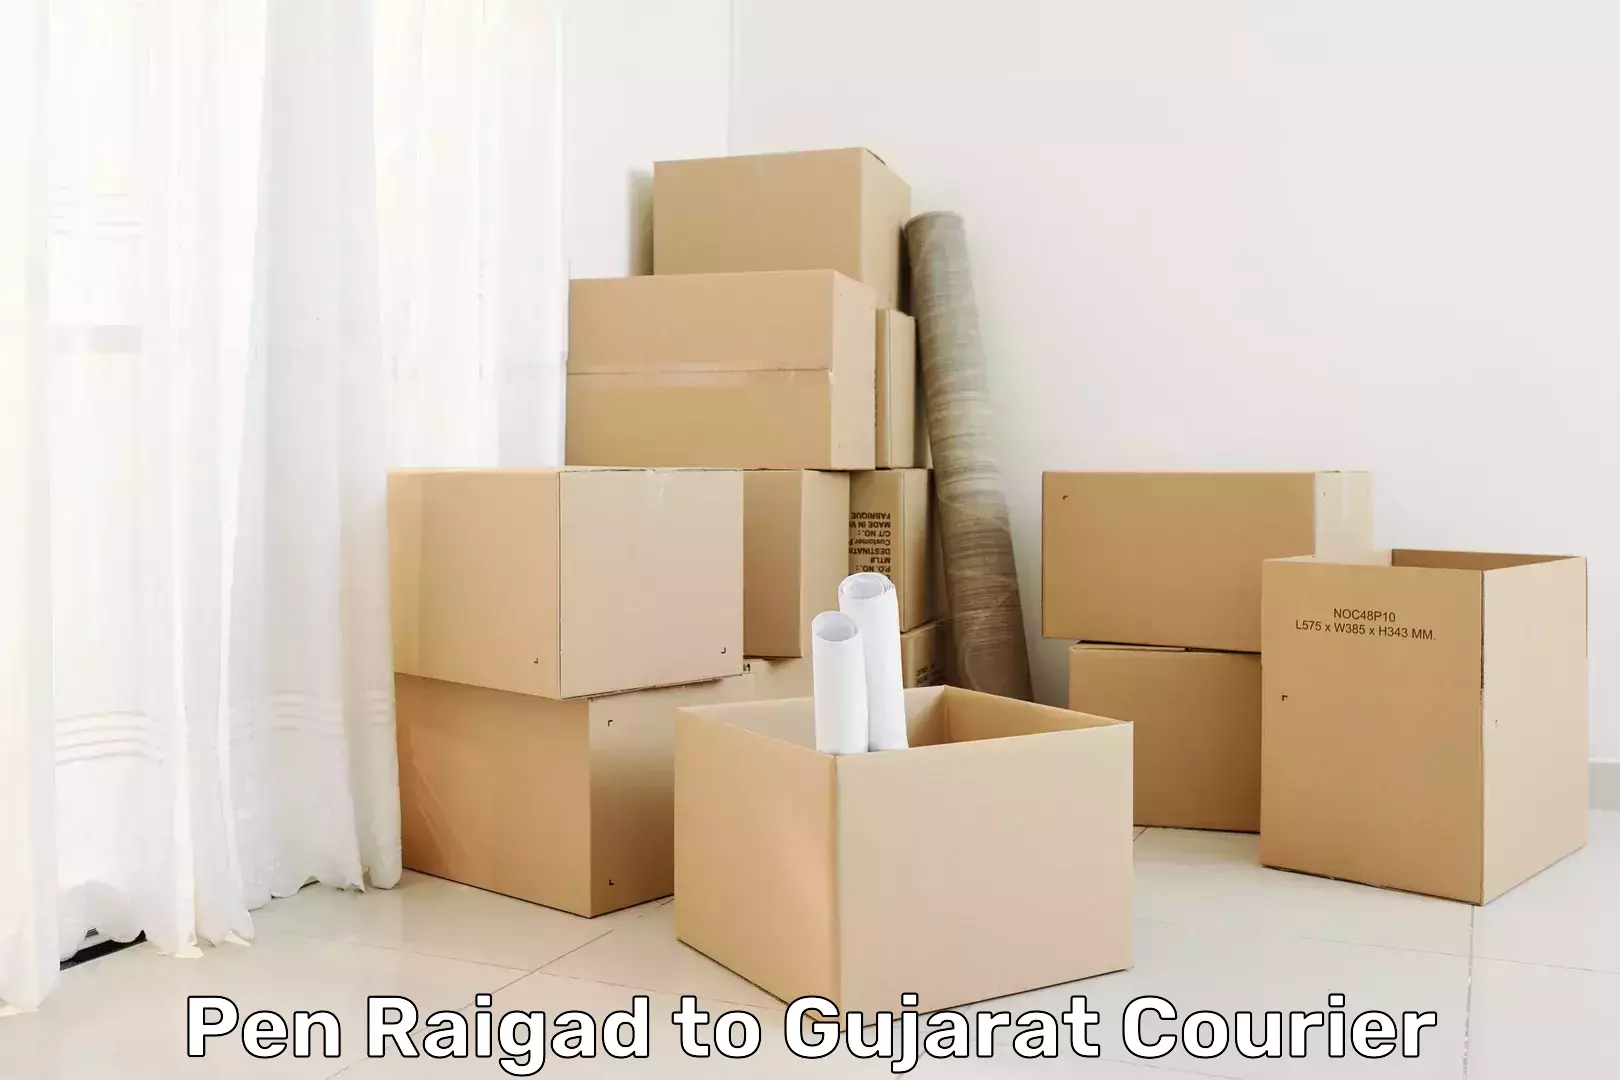 Reliable package handling Pen Raigad to Gujarat